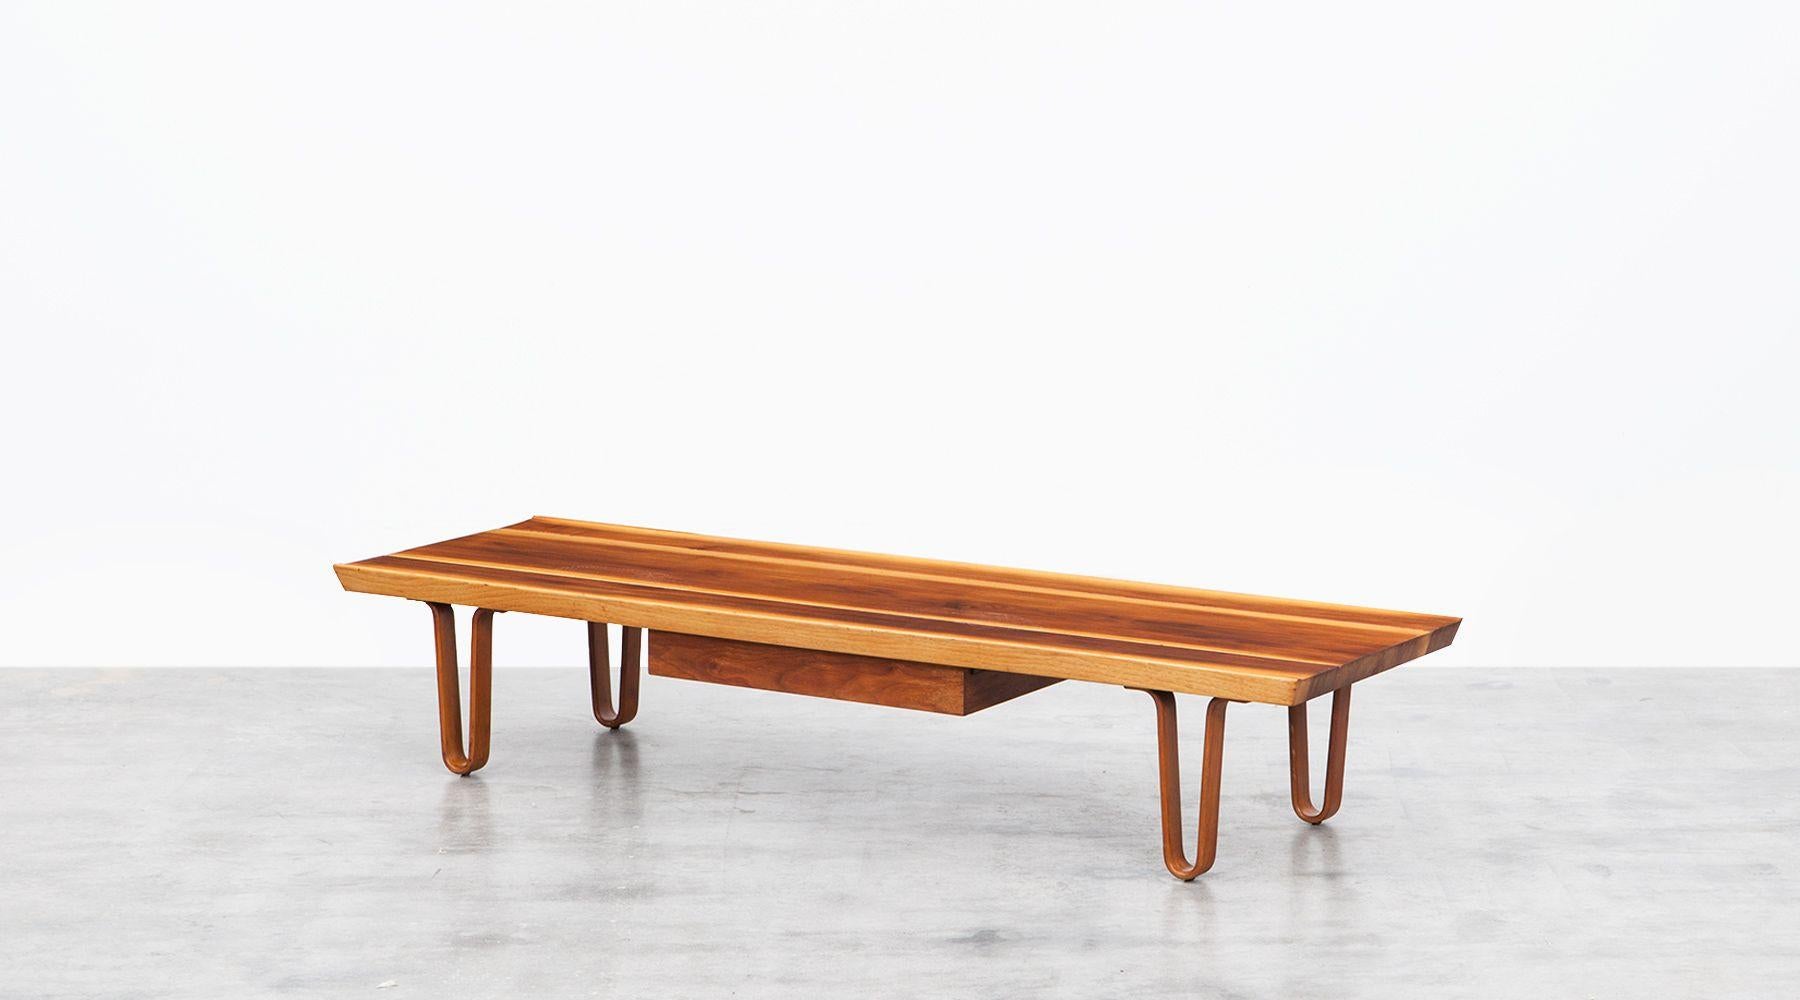 Edward Wormley bench made out of solid walnut wood with single drawer can also be used as a coffee table. The remarkable feet are plywood. Manufactured by Dunbar. We have two more examples in stock.

This design at Indiana based company Dunbar